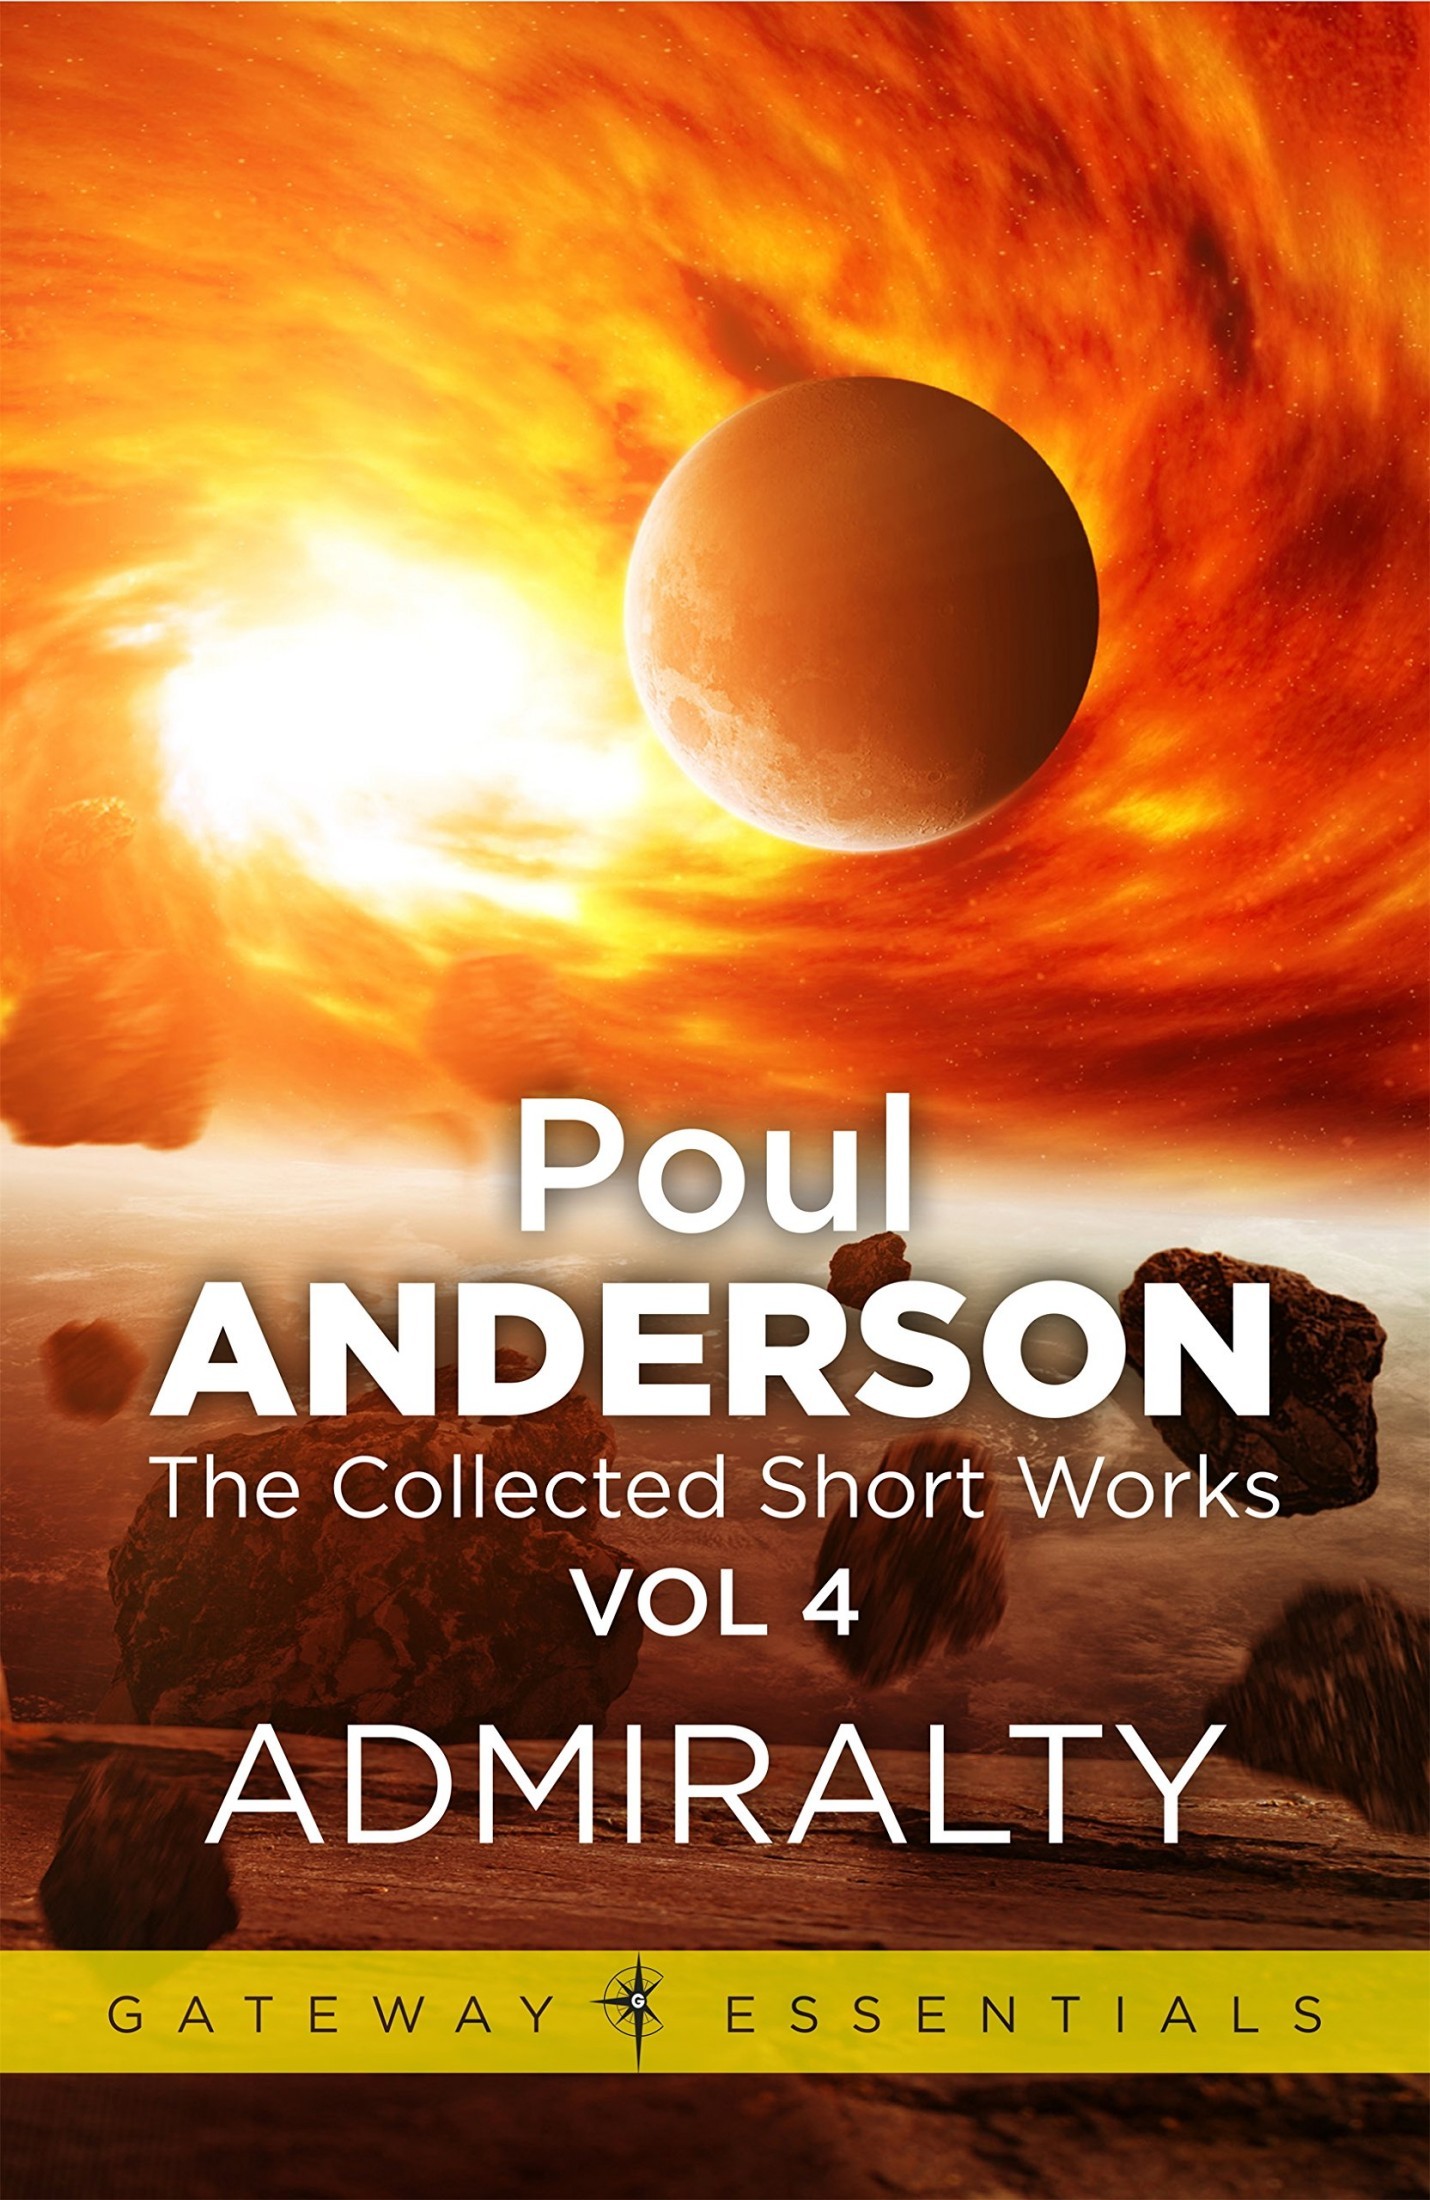 Admiralty: The Collected Short Stories Volume 4